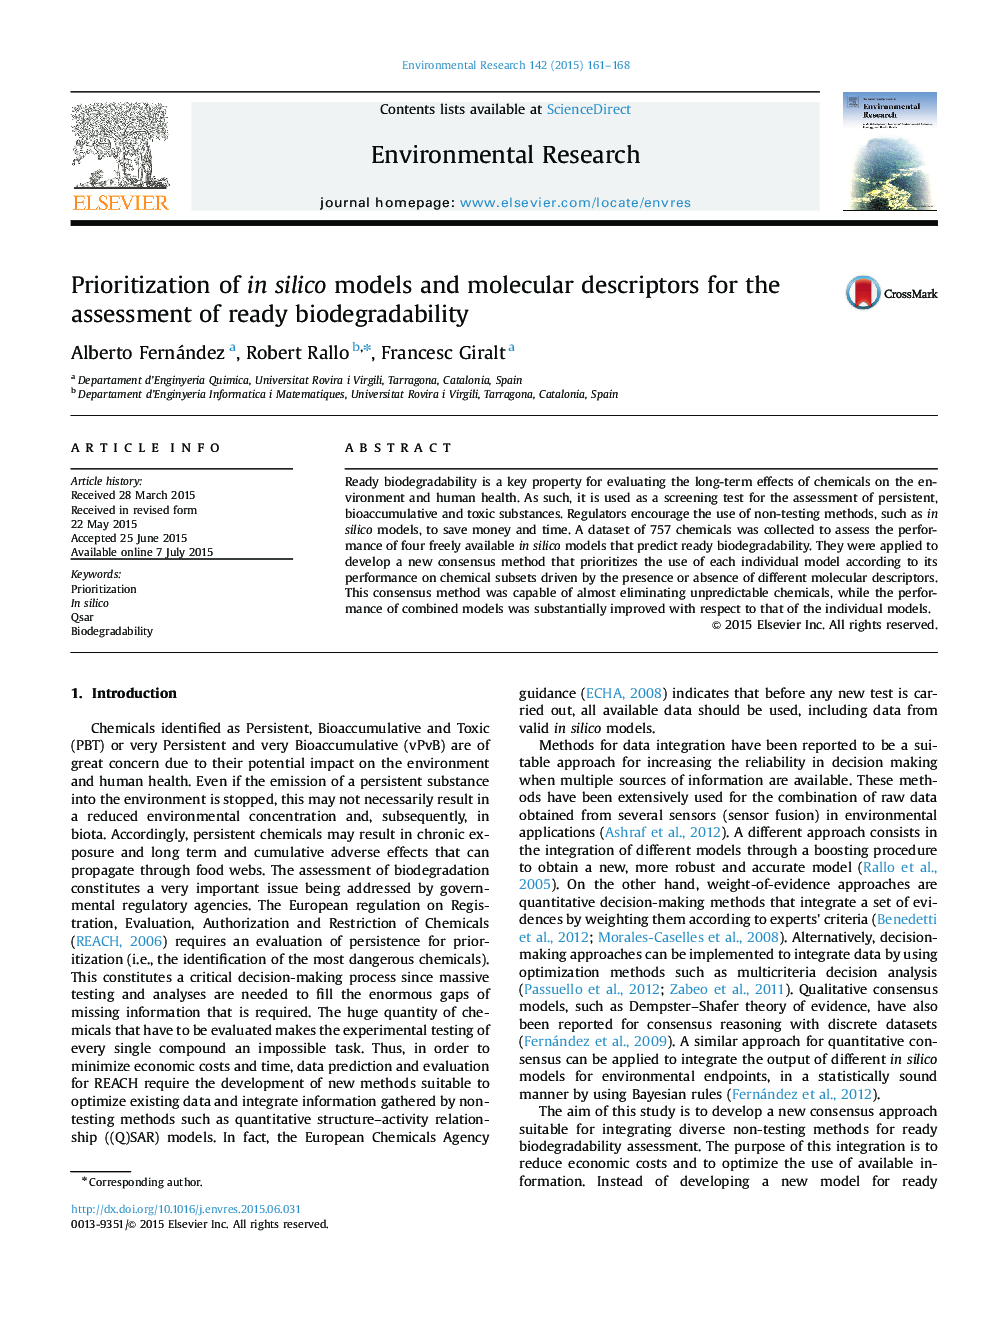 Prioritization of in silico models and molecular descriptors for the assessment of ready biodegradability